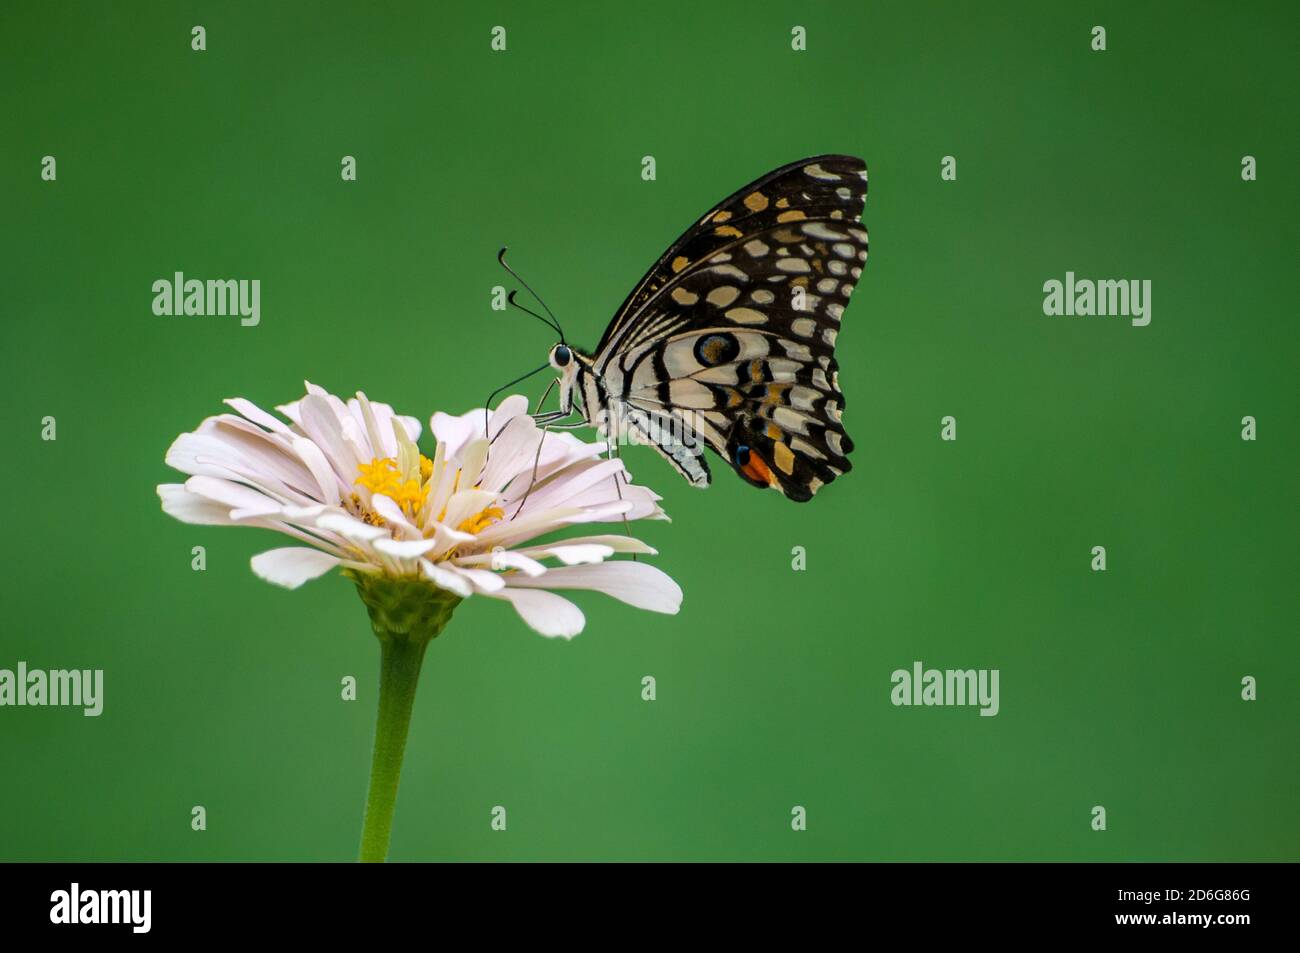 Monarch Butterfly sucking nectar from flower in green background Stock Photo